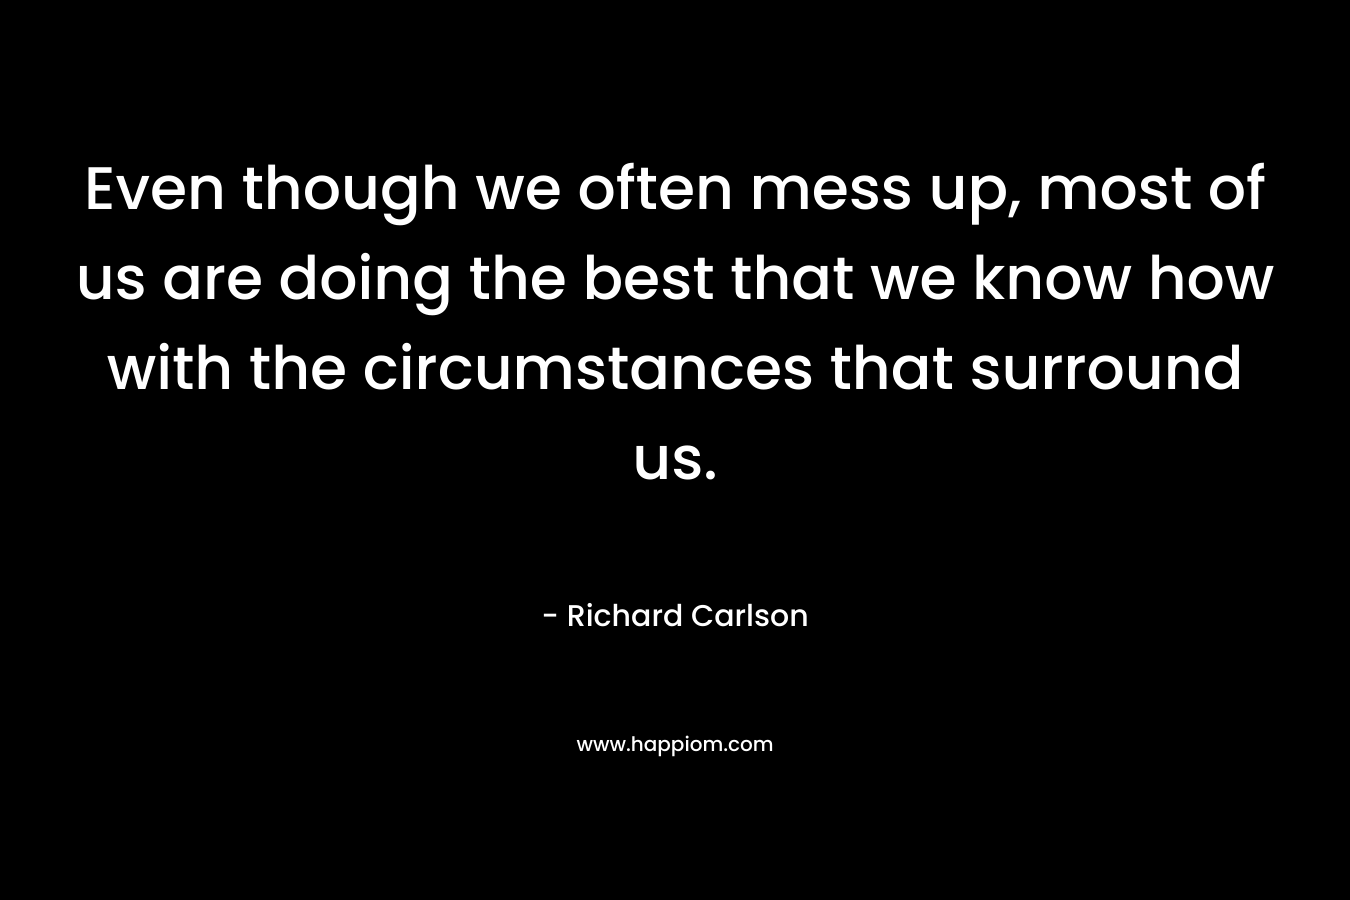 Even though we often mess up, most of us are doing the best that we know how with the circumstances that surround us. – Richard Carlson